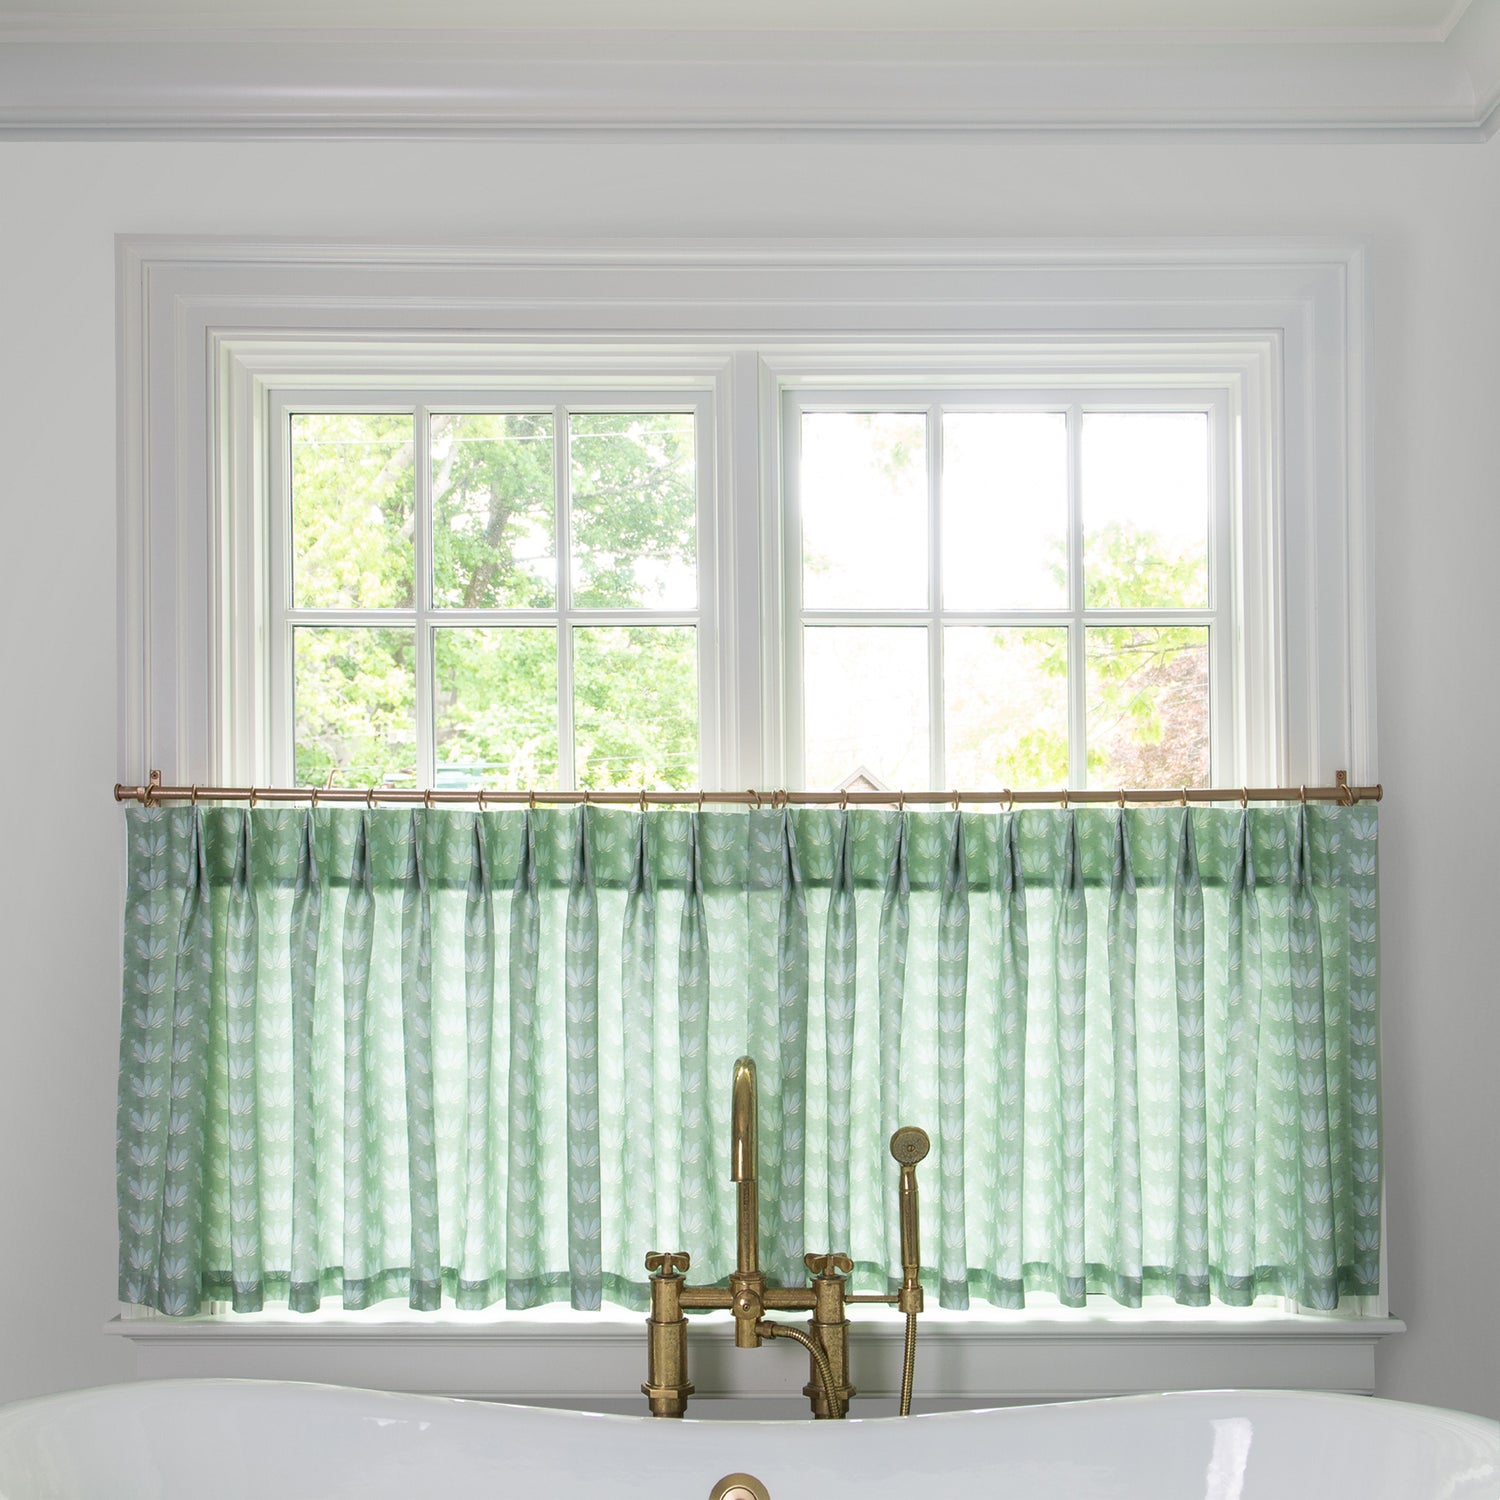 Blue & Green Floral Drop Repeat Printed Cotton curtain on a metal rod in front of an illuminated window in a bathroom 